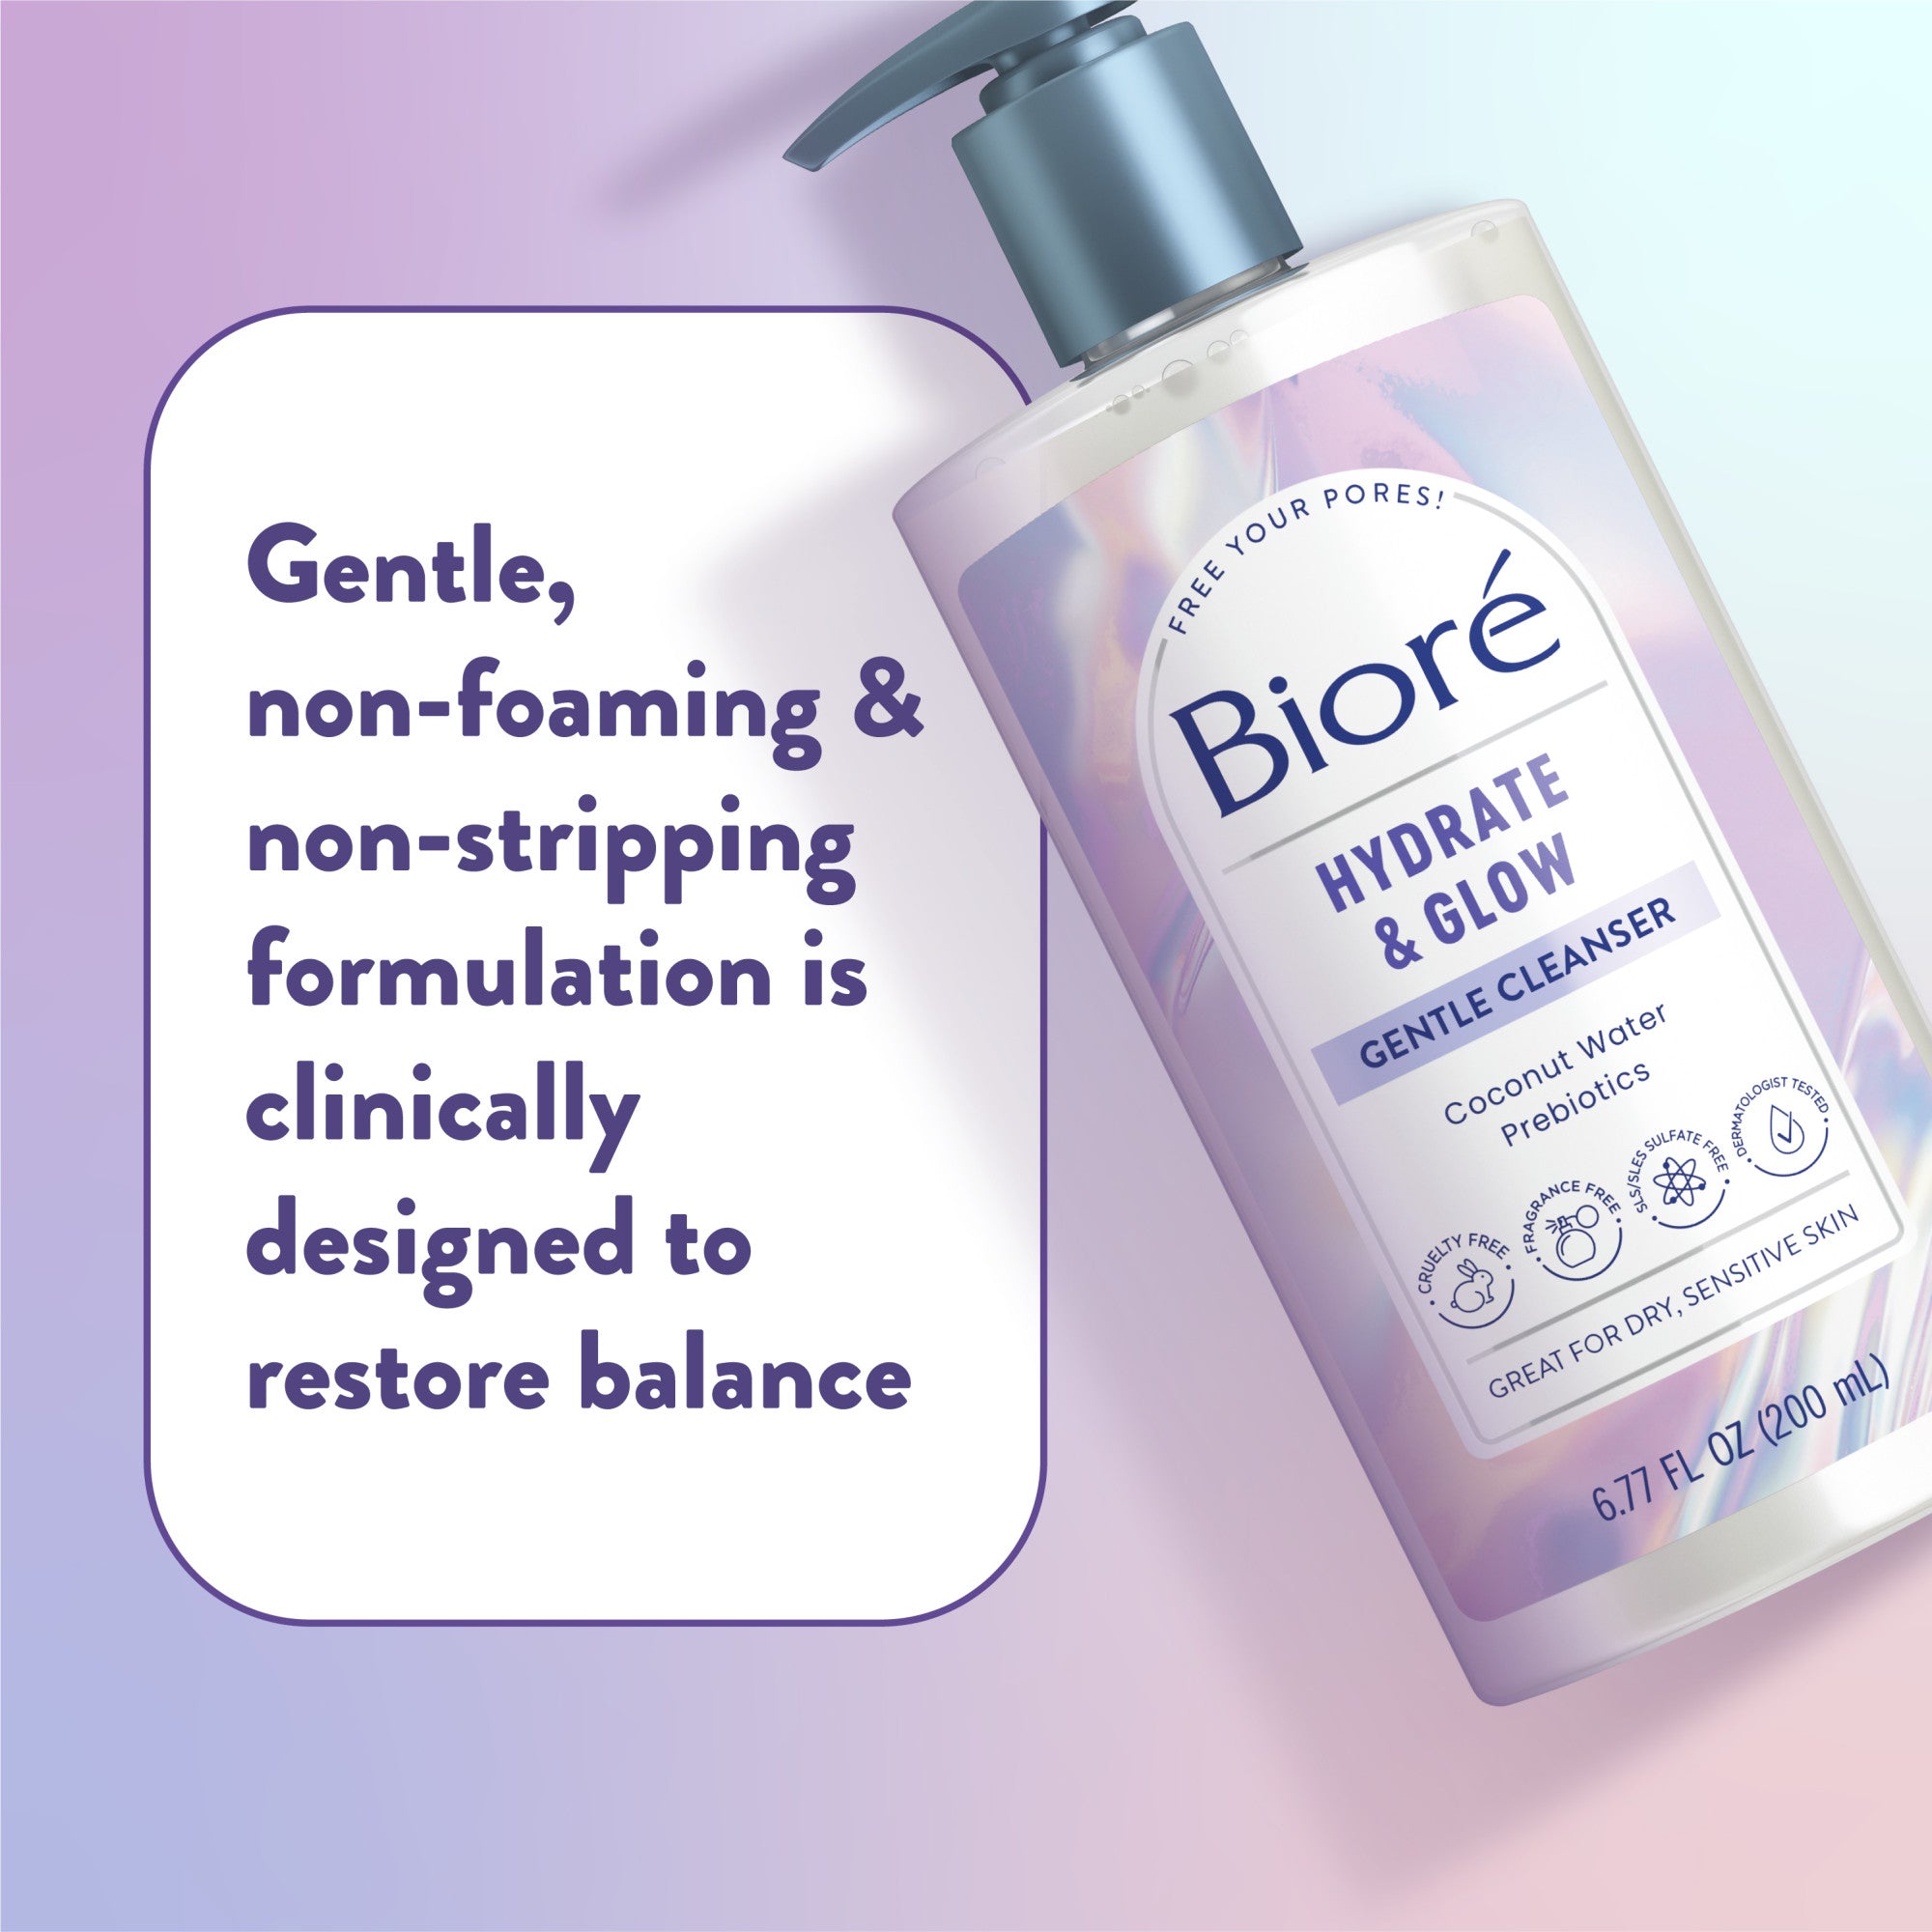 Gentle, non-foaming and non-stripping formulation is clinically designed to restore balance.